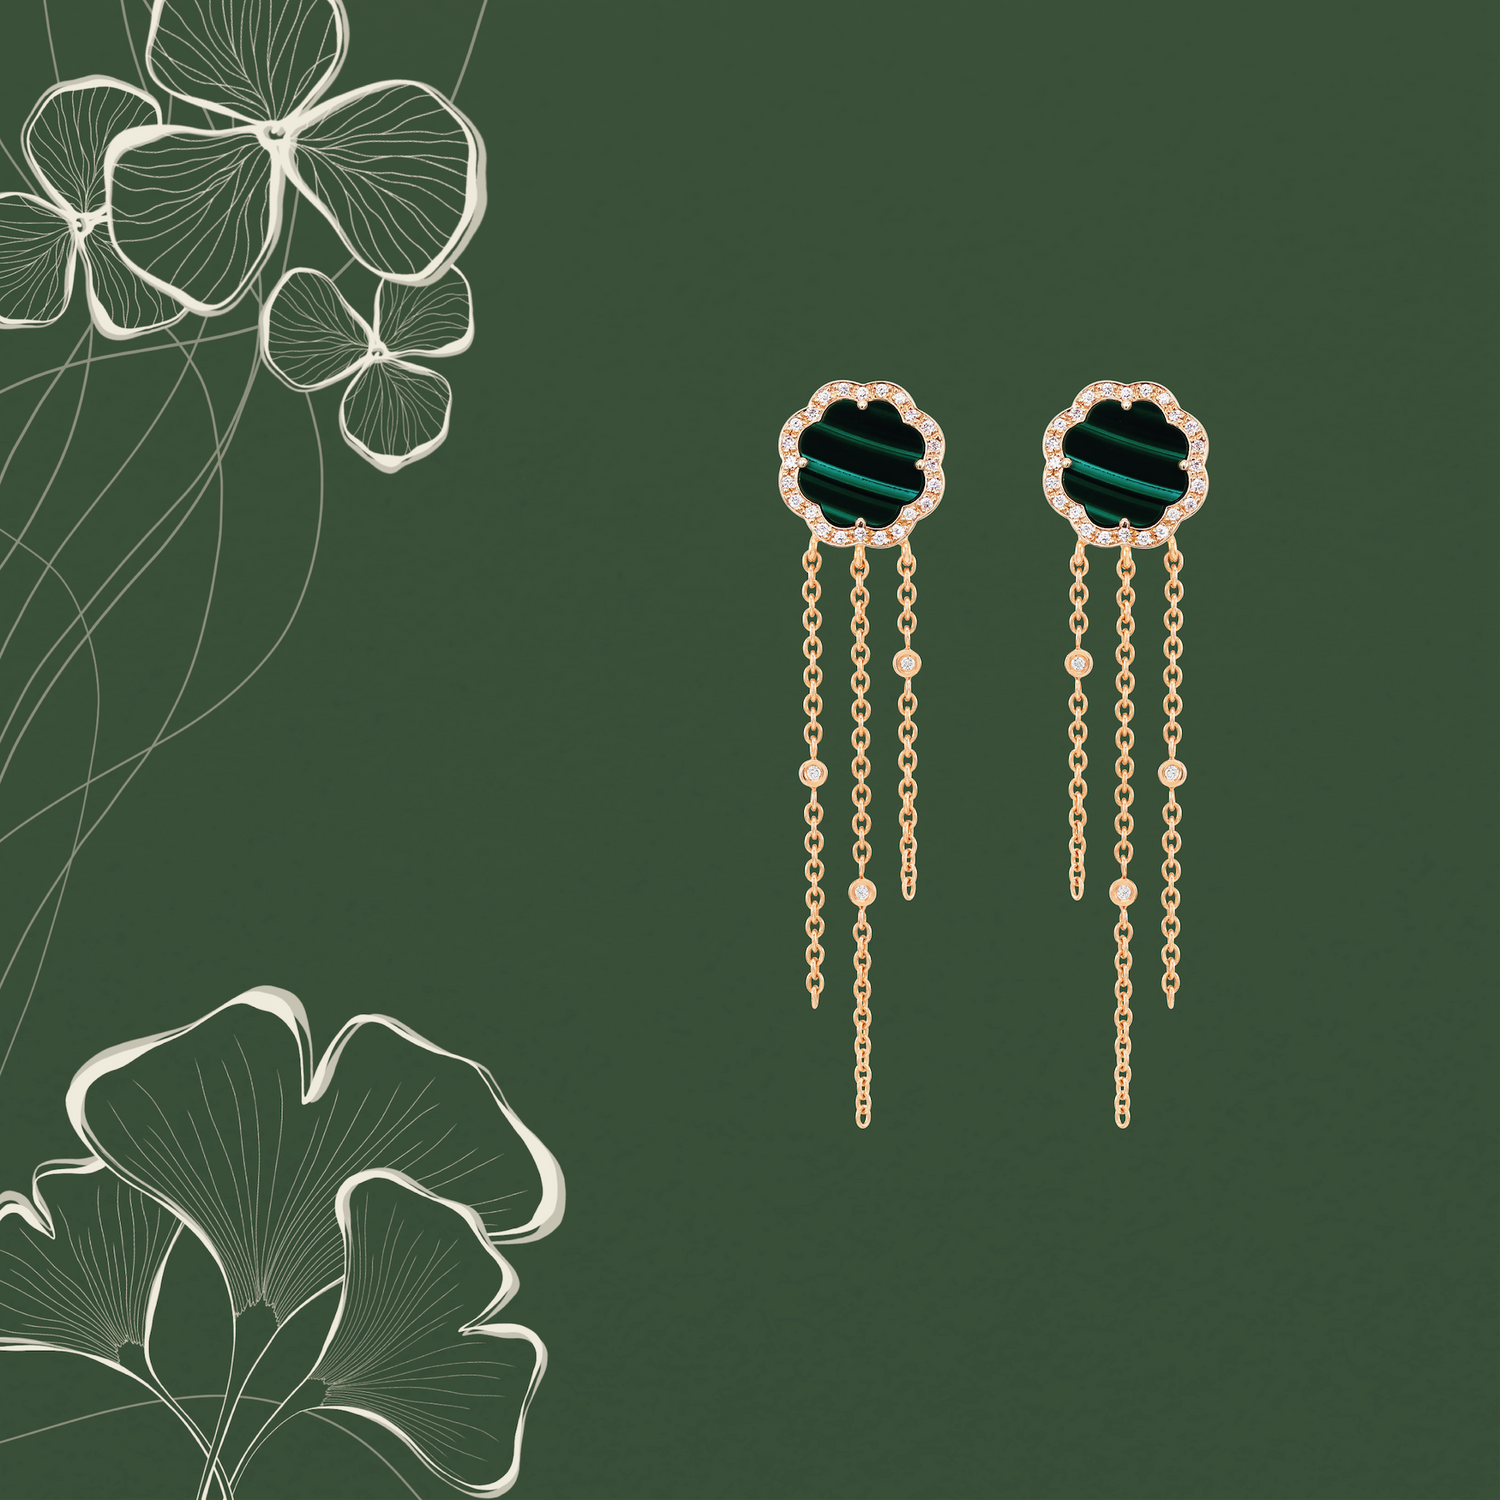 Rose gold pendant earrings from Mimosa En Mémoire collection set with malachite and diamonds.